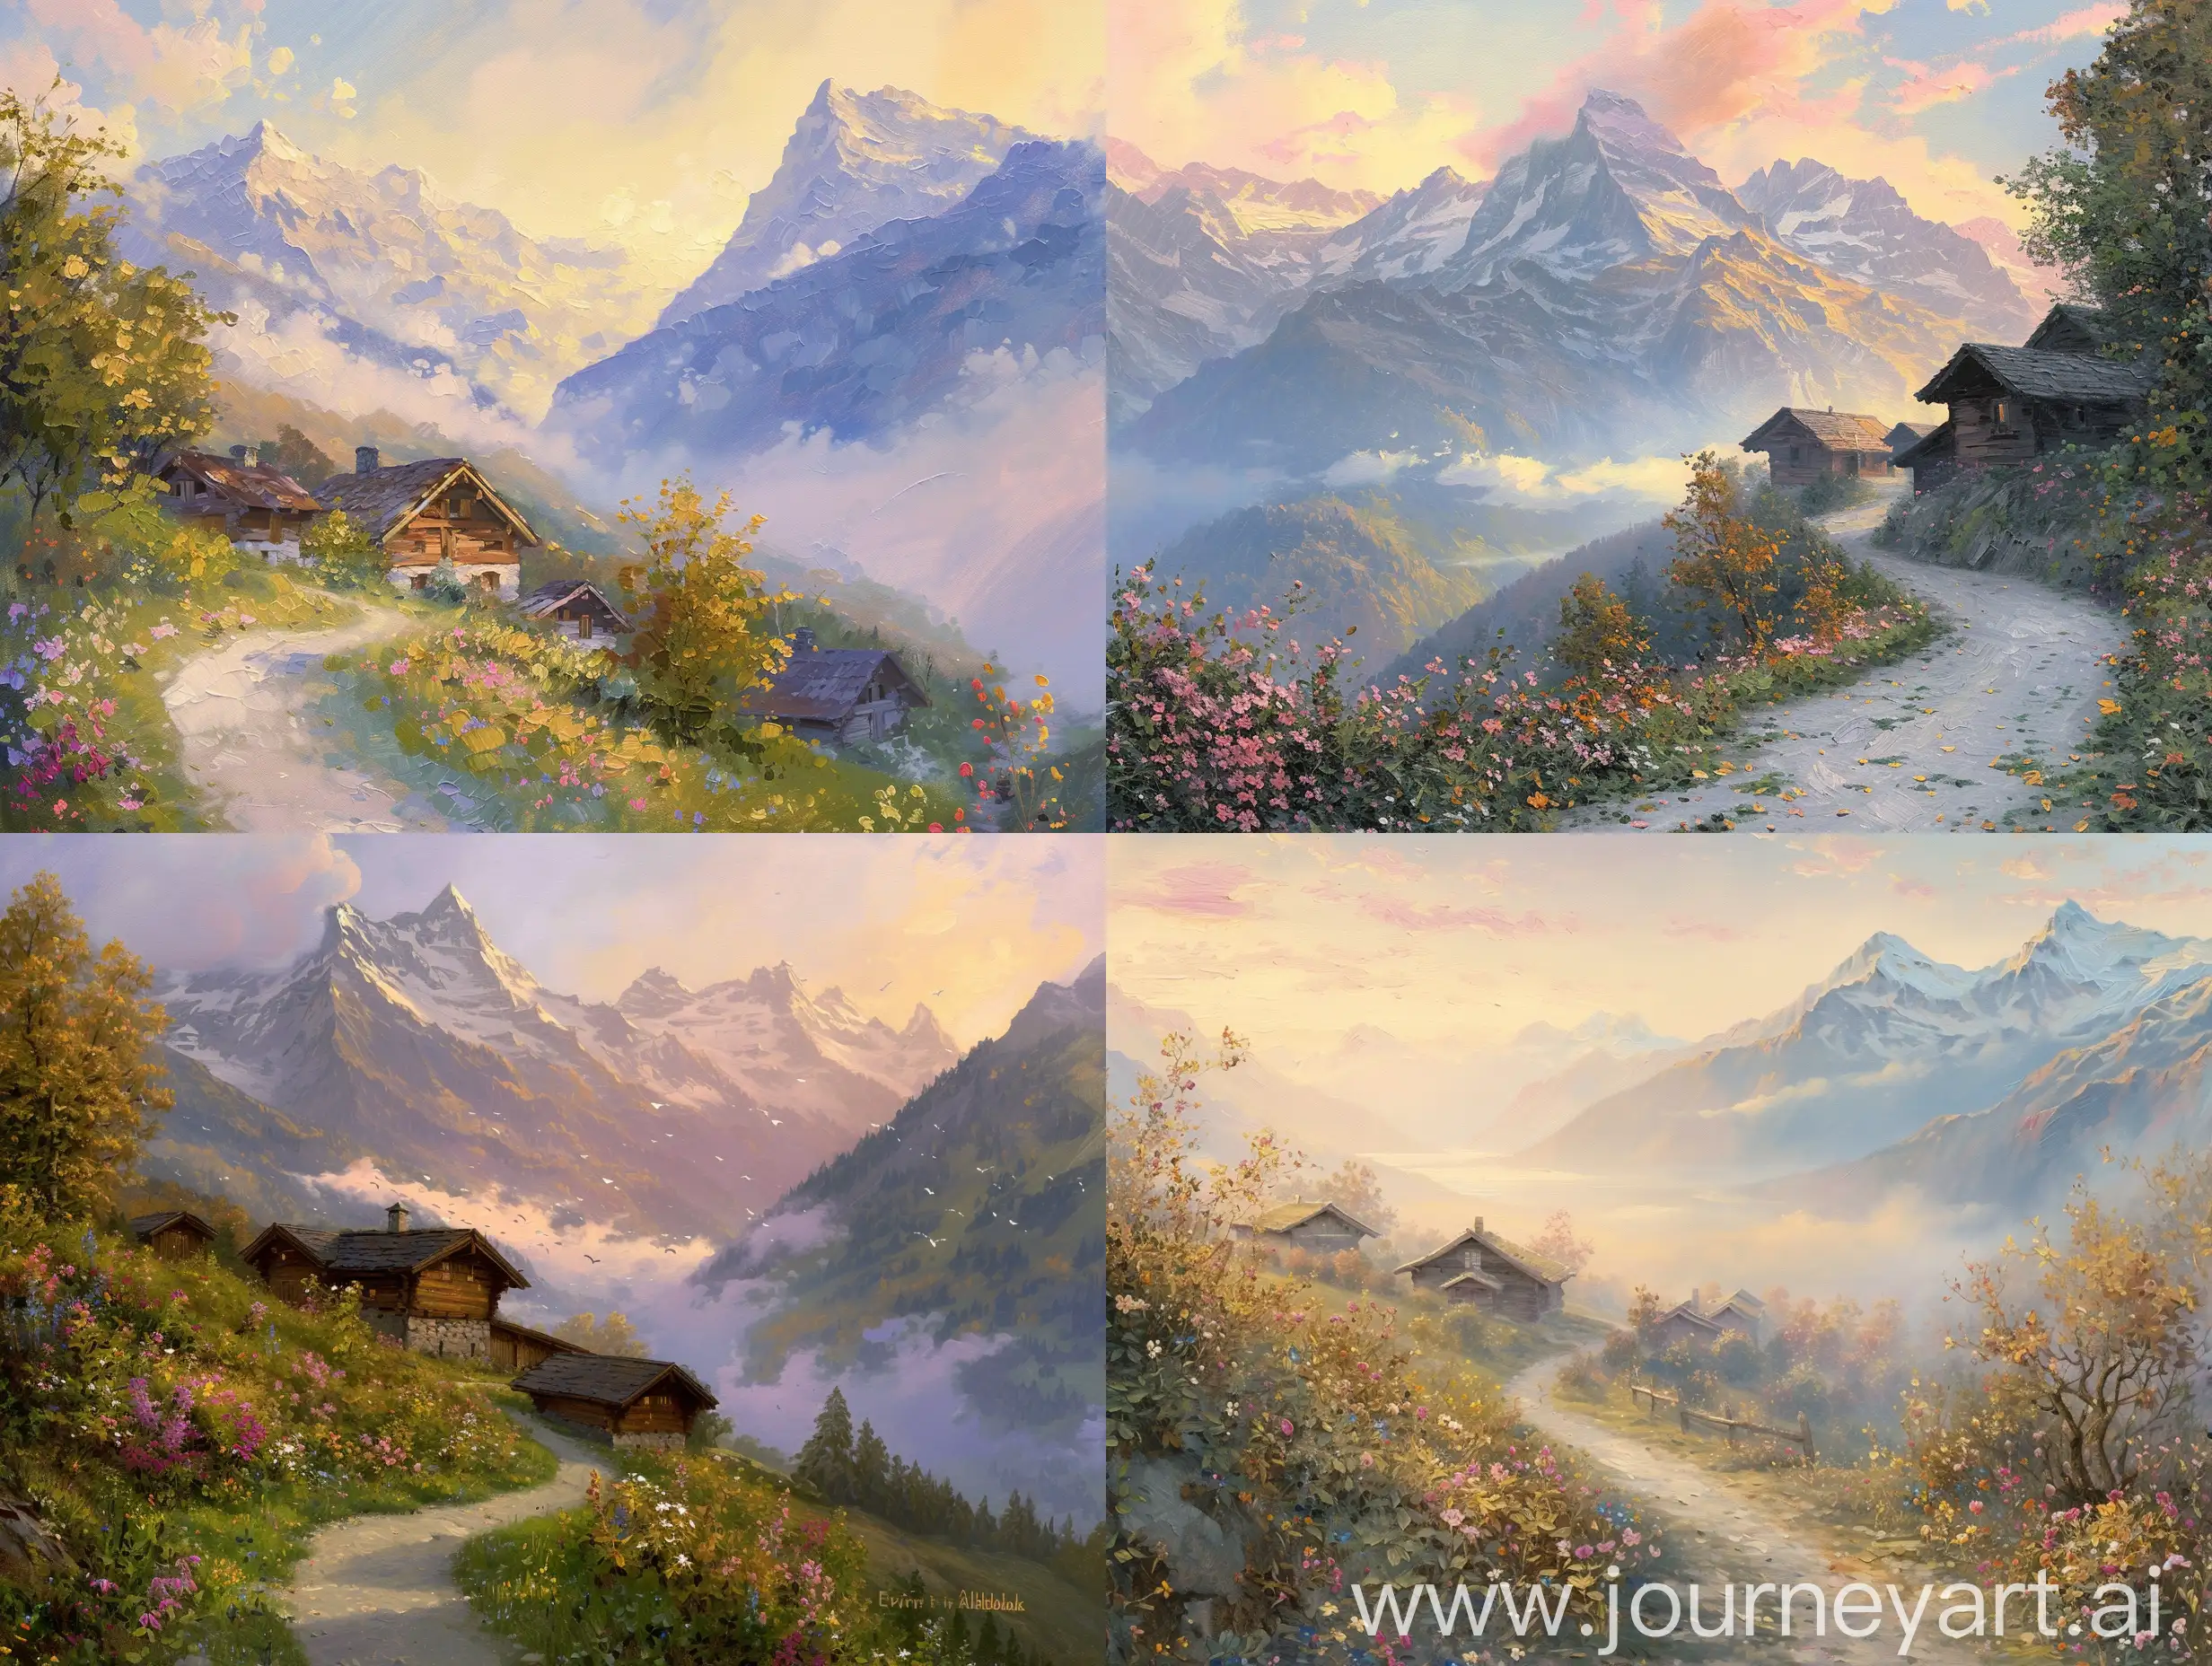 Title: "Evening in Adelboden" - Oil Painting by Waldemar Fink

Prompt:

Enter a realm where twilight descends upon the Swiss Alps, as depicted in Waldemar Fink's "Evening in Adelboden."

Setting the Scene:

Travel to a winding path among the Swiss Alps, where the sun's farewell kiss paints the sky in pastel hues. Adelboden's charm emerges, its chalets adorned with vibrant blooms.

Capturing the Atmosphere:

Note Fink's skillful play of light and shadow, casting a golden glow over the landscape. Mist veils distant peaks, adding a touch of mystery.

Exploring the Details:

Observe the intricate brushstrokes breathing life into every element, from fluttering leaves to rugged mountainsides. Earthy tones blend with soft pinks and blues.

Invoking Emotion:

Feel the awe of nature's grandeur and the tranquility enveloping you. Lose yourself in the serenity of the Swiss Alps.

Your Interpretation:

Let your creativity flow, whether through bold colors or delicate details, capturing the essence of "Evening in Adelboden."

Embark on your artistic journey into the enchanting world of "Evening in Adelboden" and let your creativity soar.